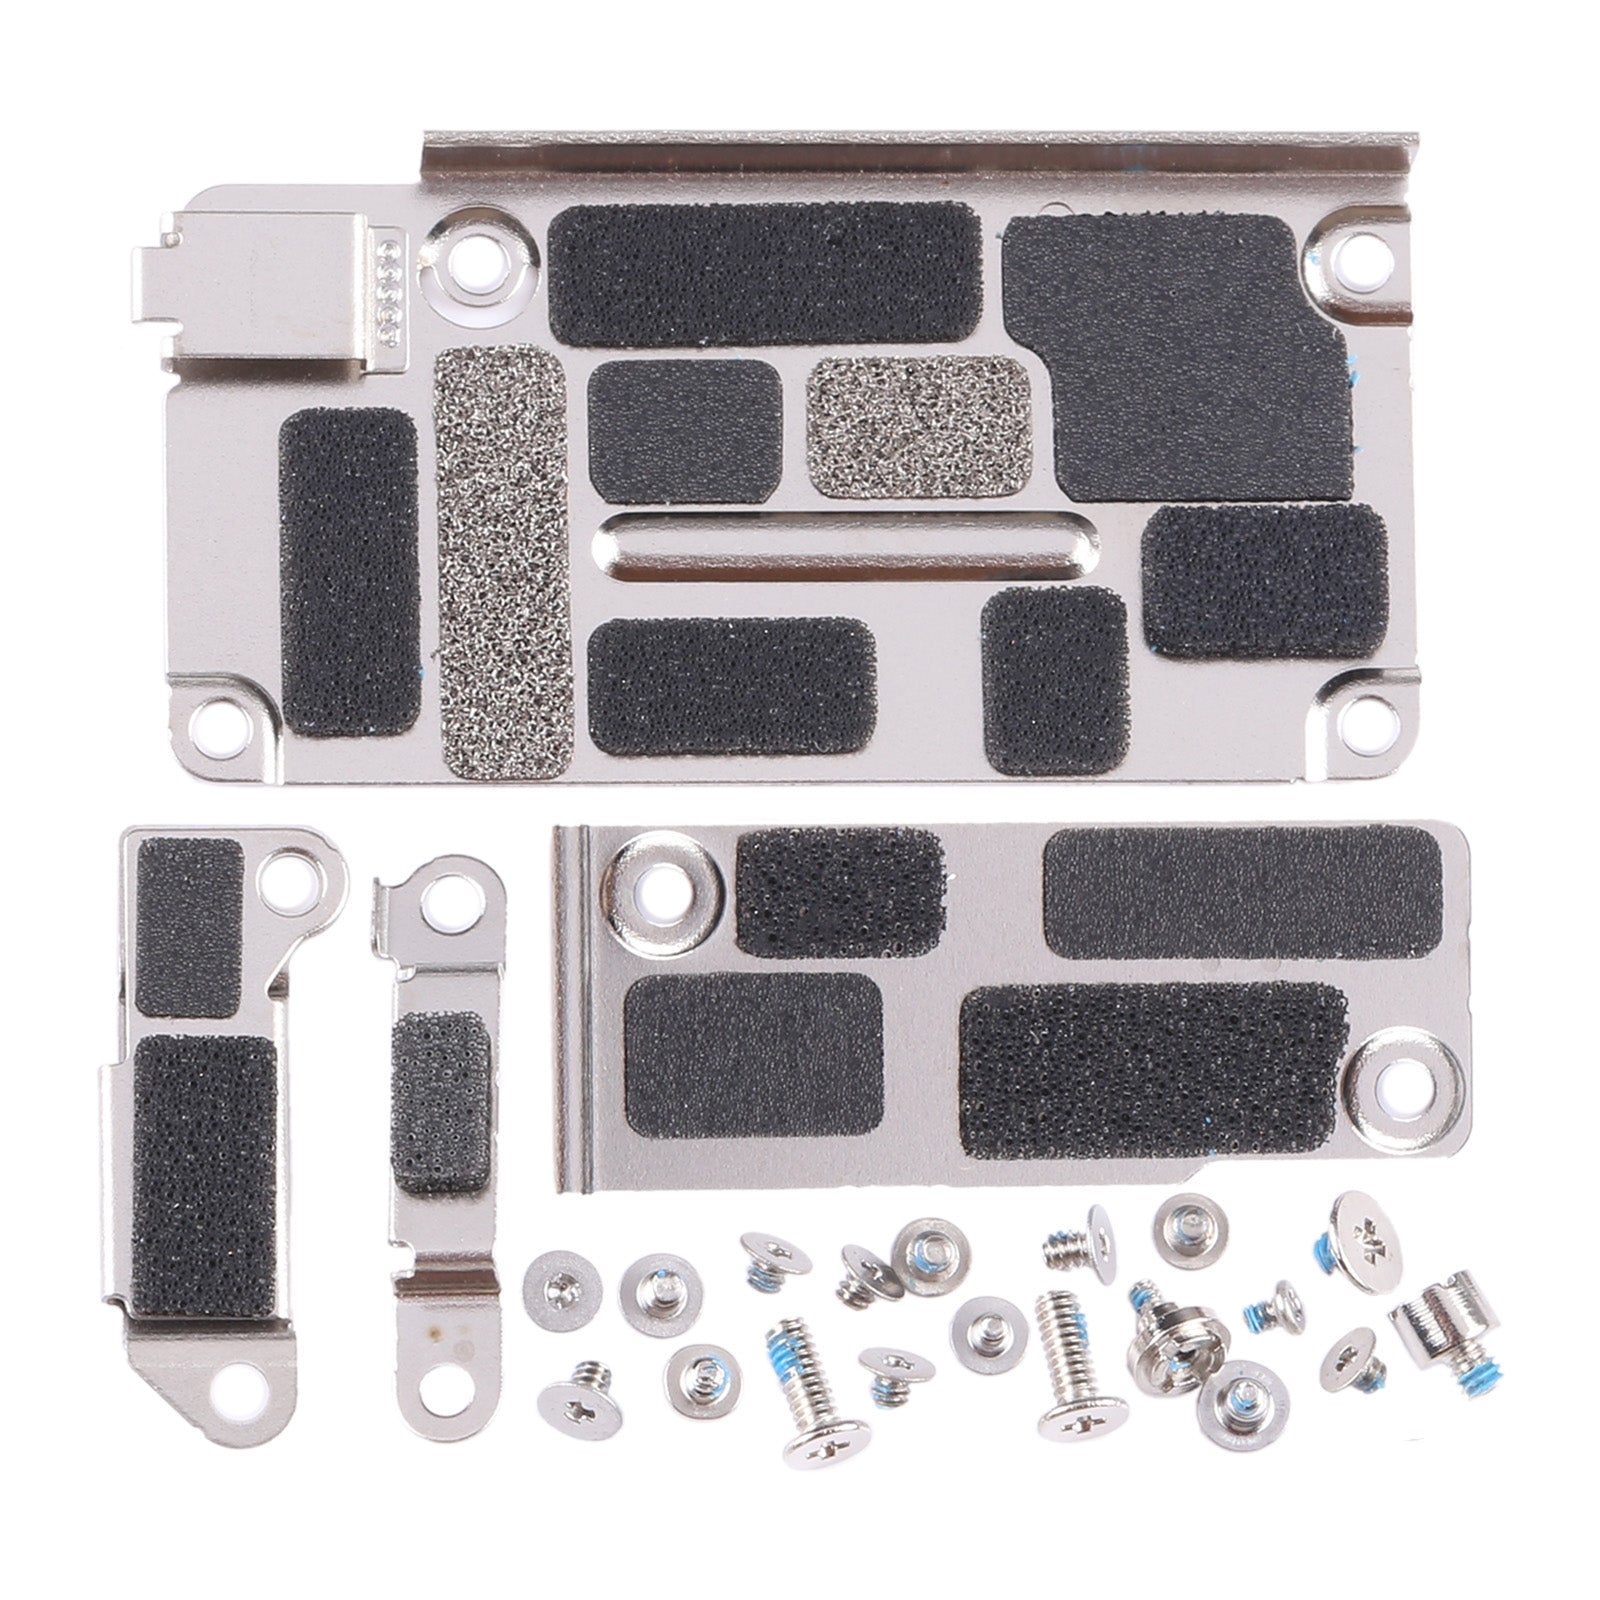 Pack of Internal Metal Parts iPhone 12 Pro / 12